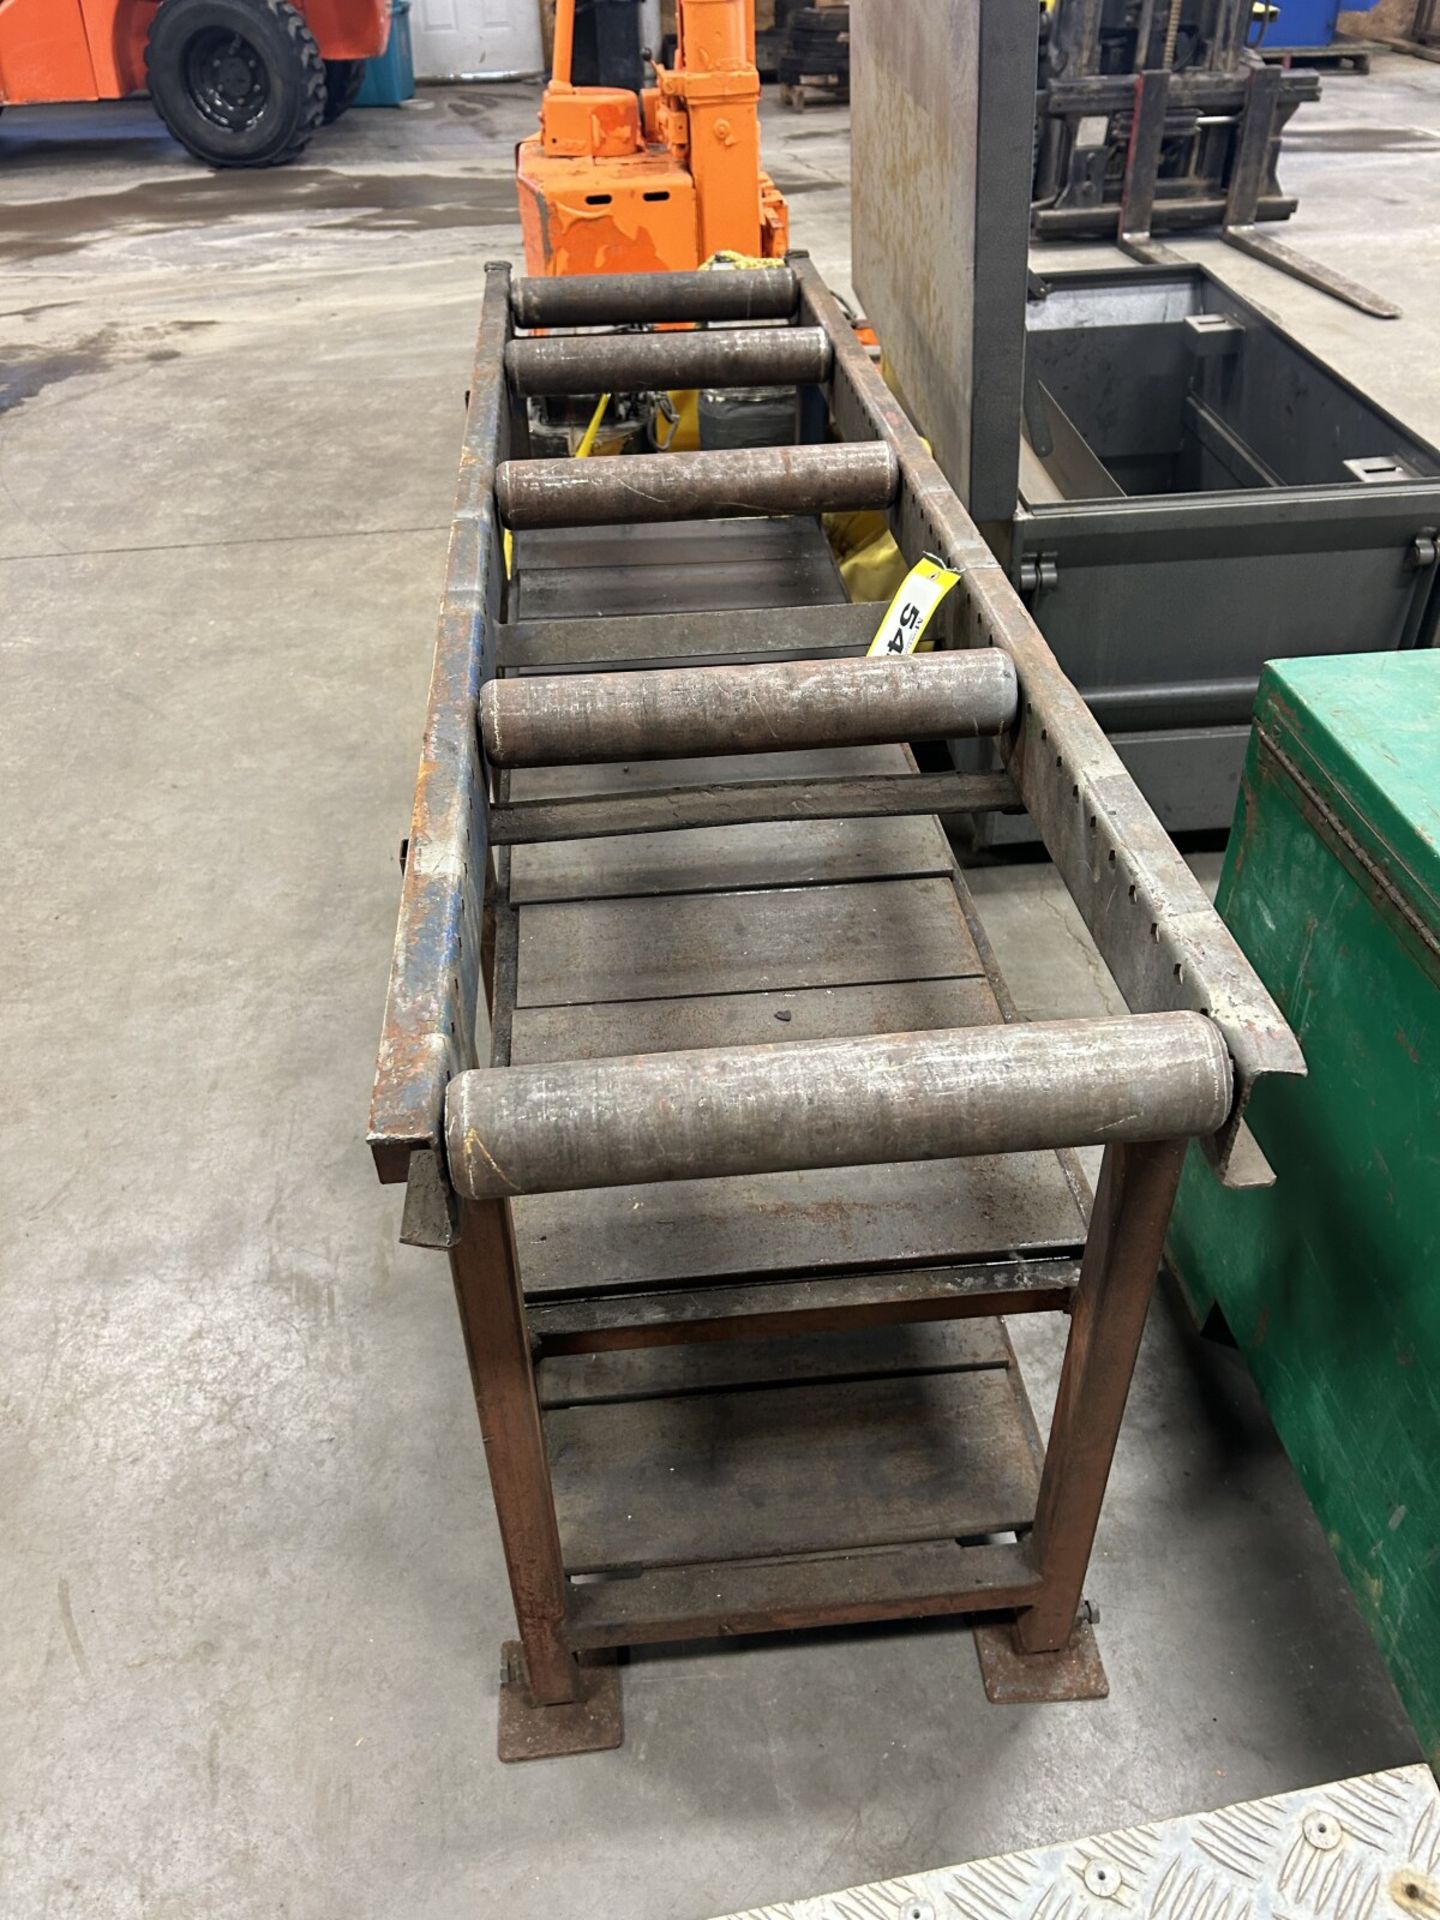 SET OF 15"x72" INFEED ROLLERS - Image 2 of 3